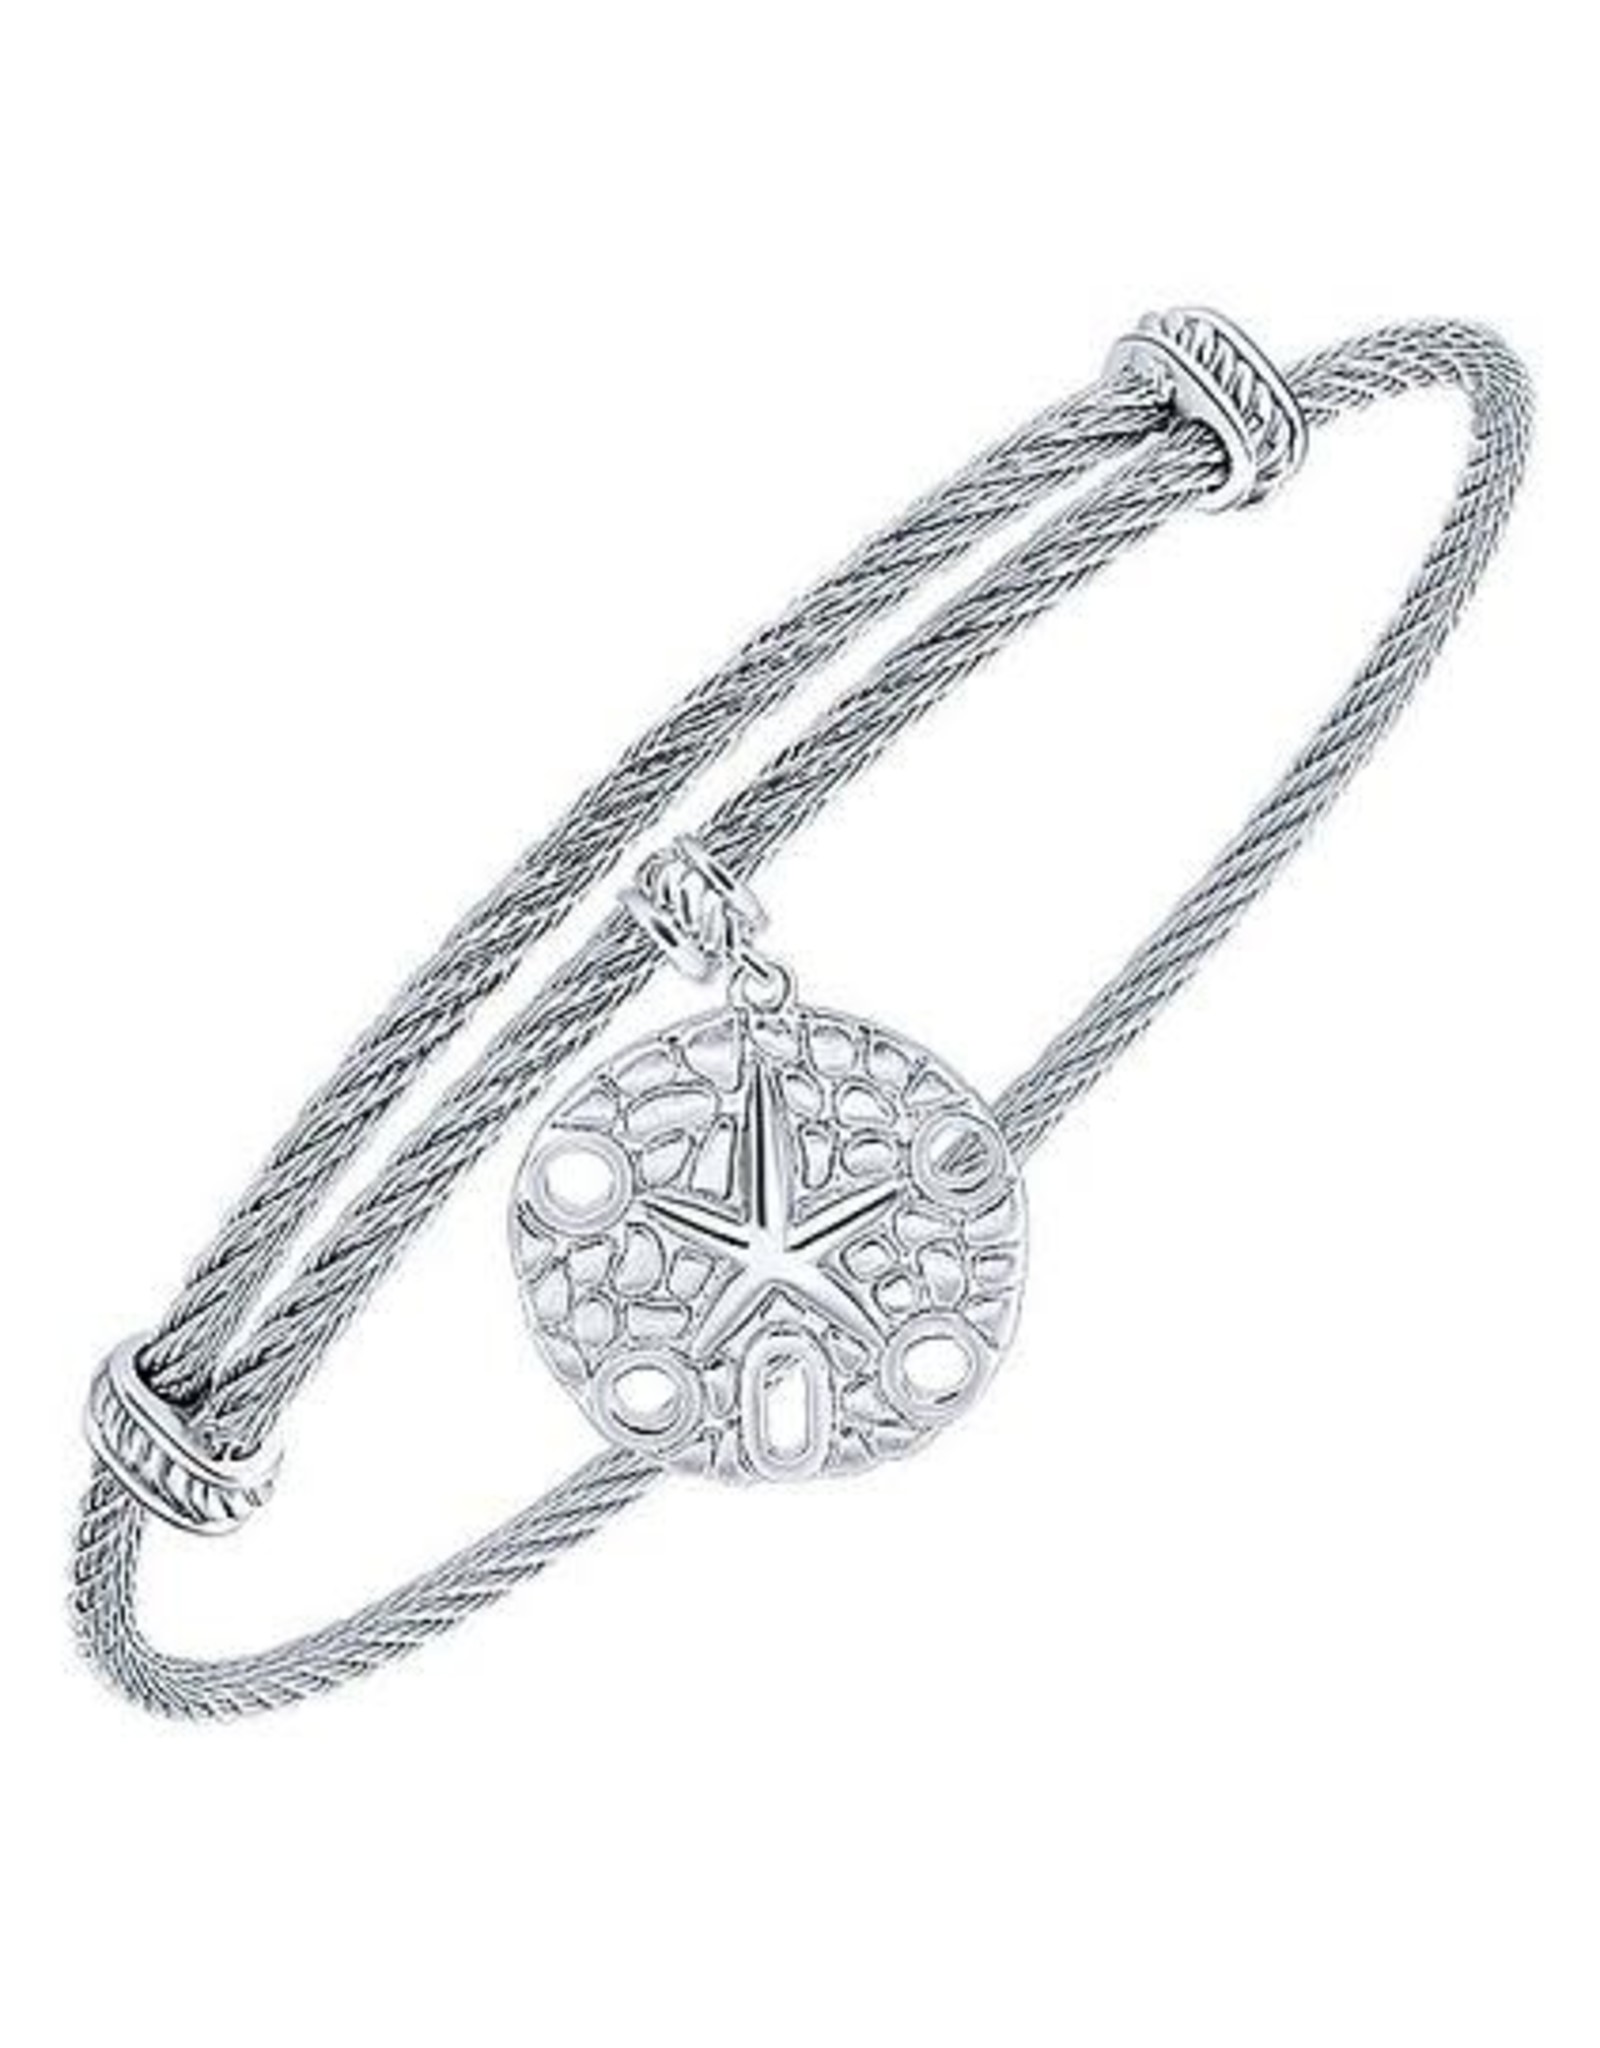 Adjustable Twisted Cable Stainless Steel Bangle Bracelet with Sterling Silver Sand Dollar Charm